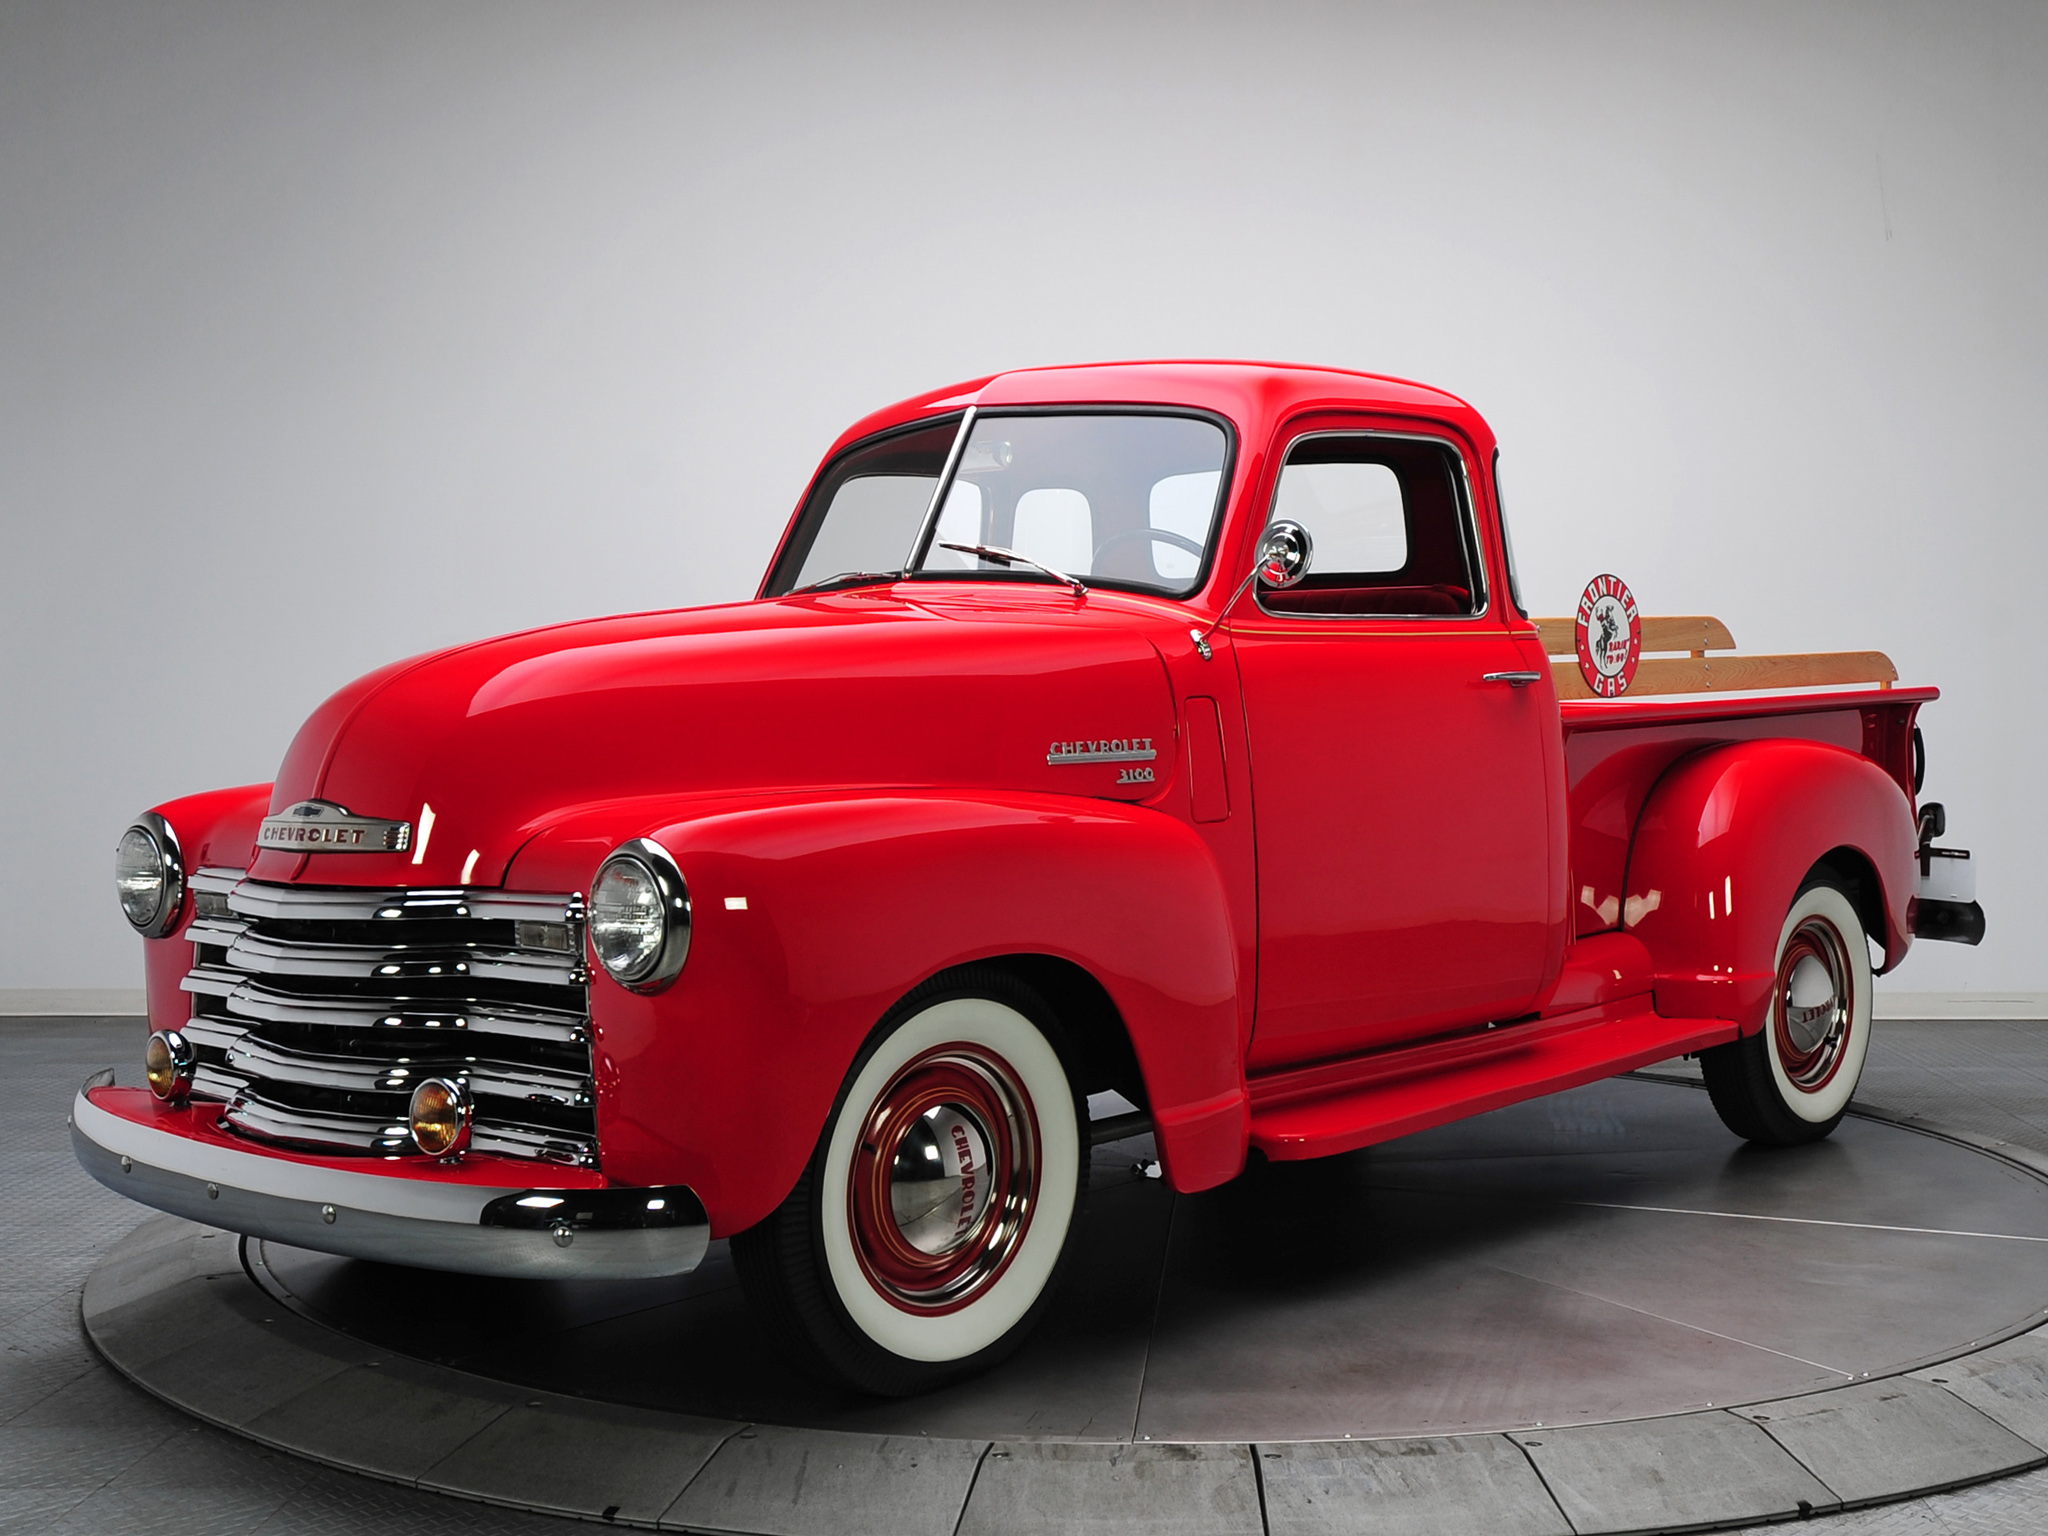 Chevrolet Wallpapers Chevrolet 3100 Pickup HP 3104 1950 Wallpapers 2048x1536